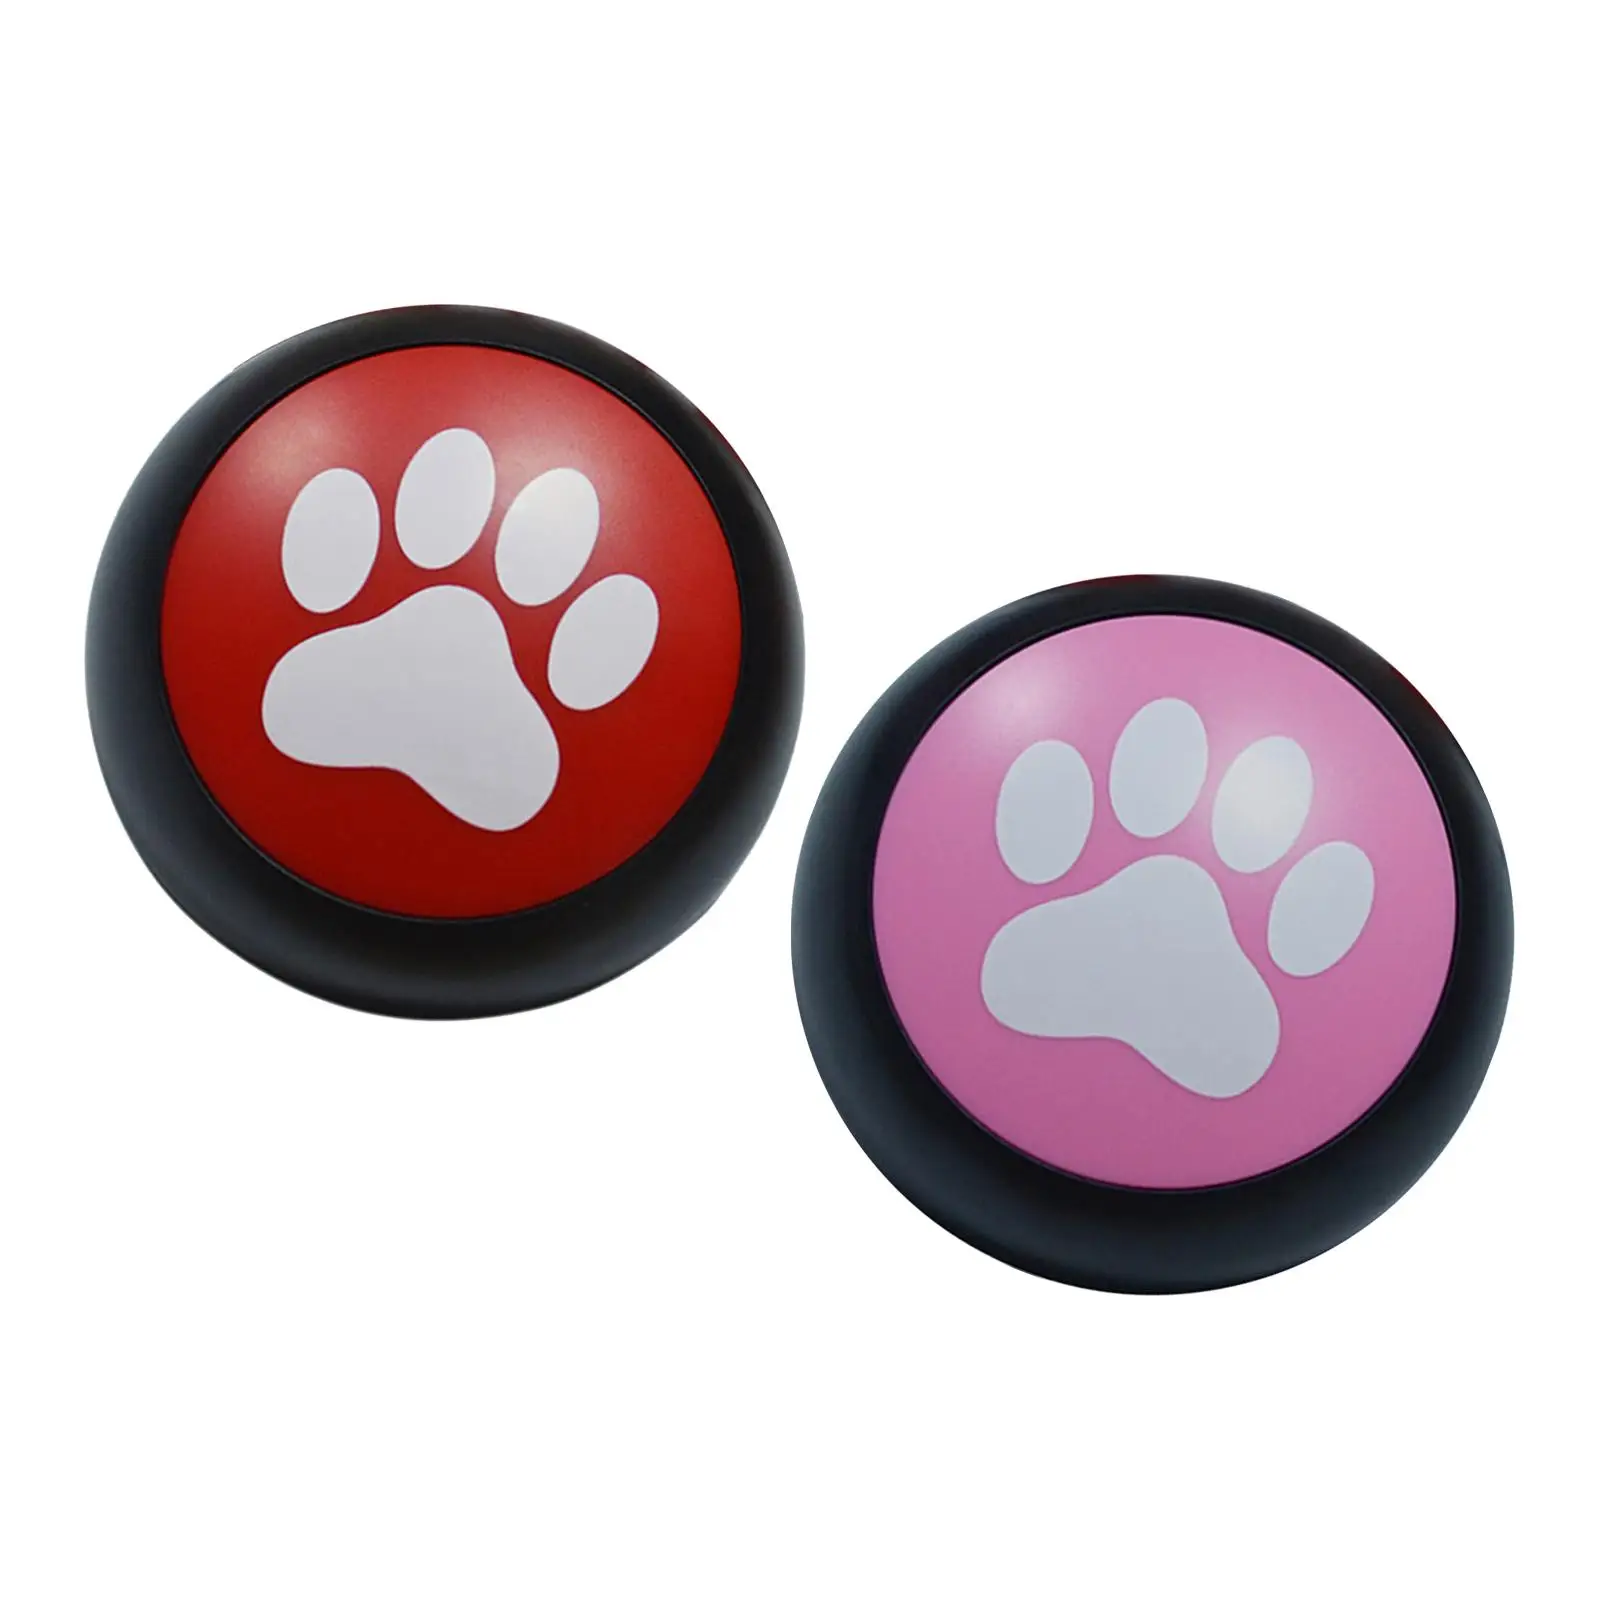 Recordable Sound Button Communication Educational Toy Recorder Playback Recording Sound Button Child Learning Pet Training